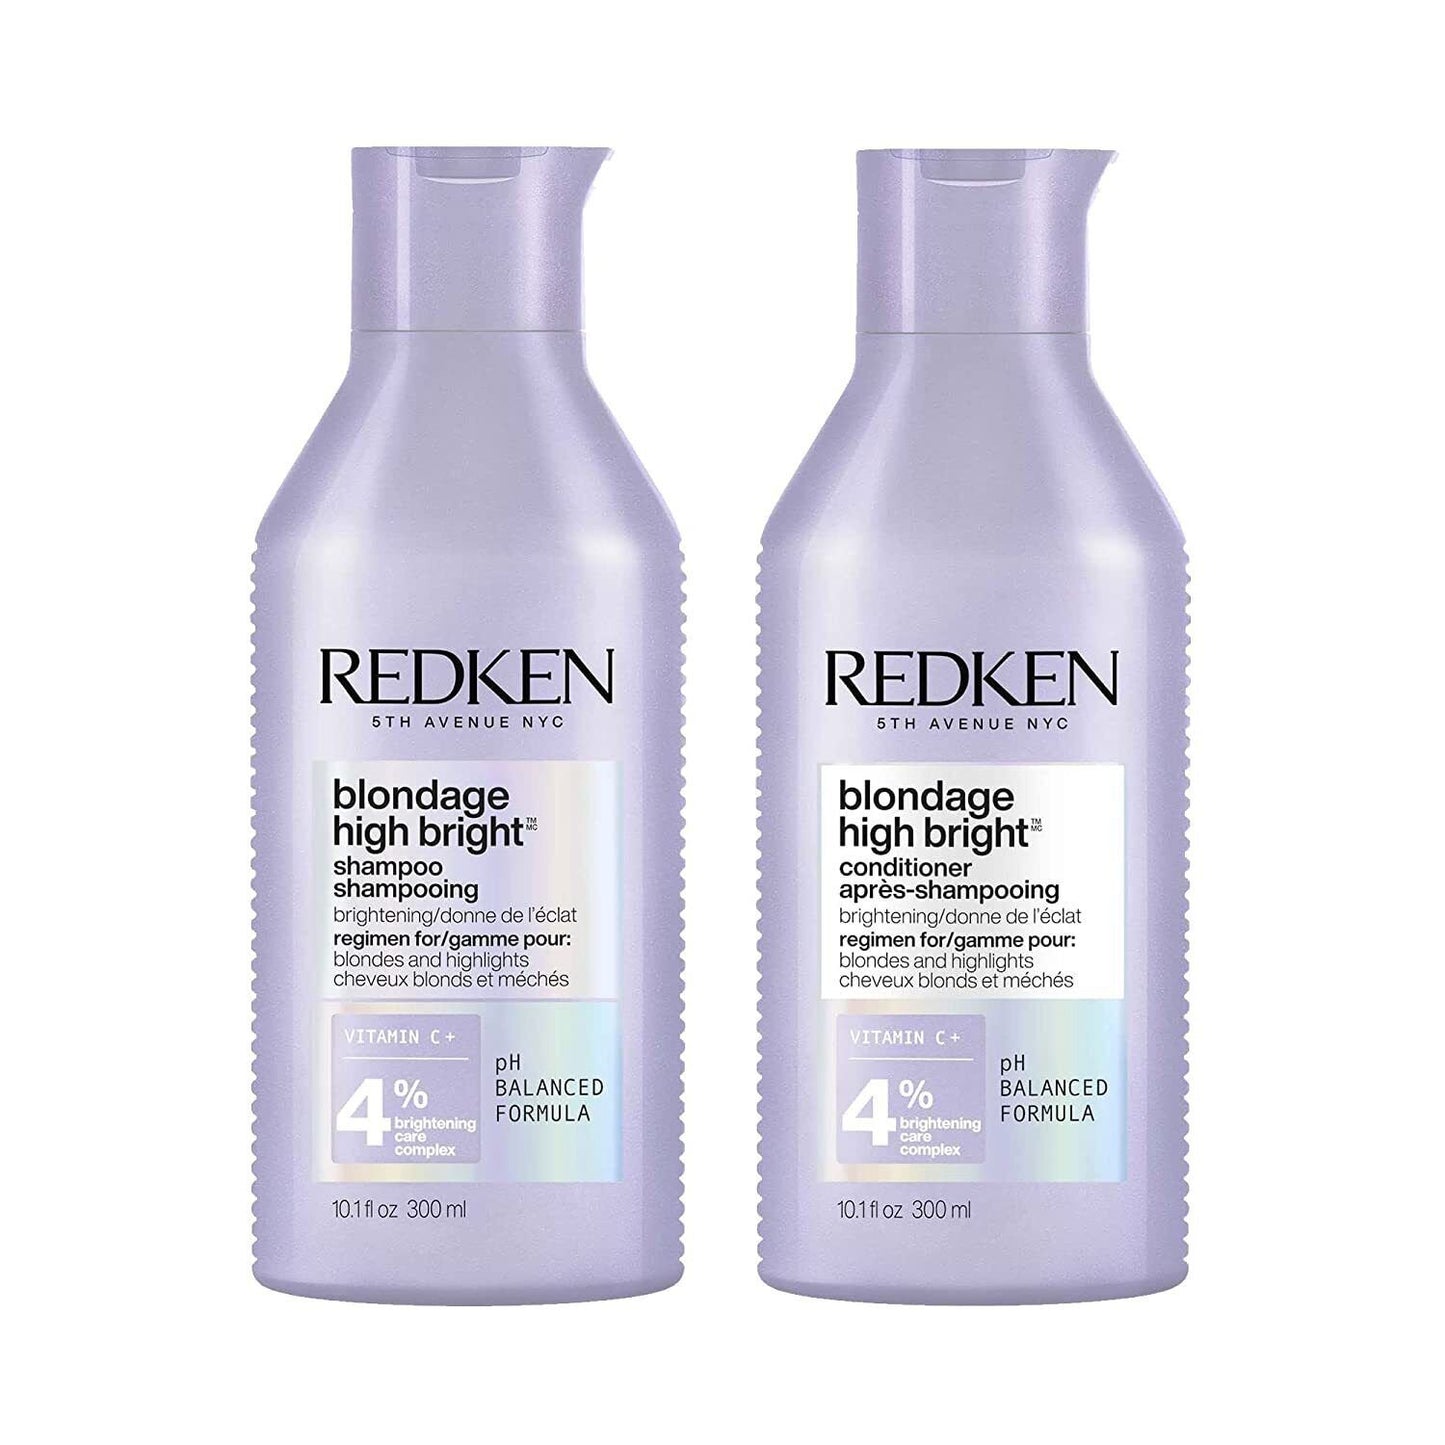 Redken Blondage High Bright Shampoo and Conditioner 10.1oz Duo